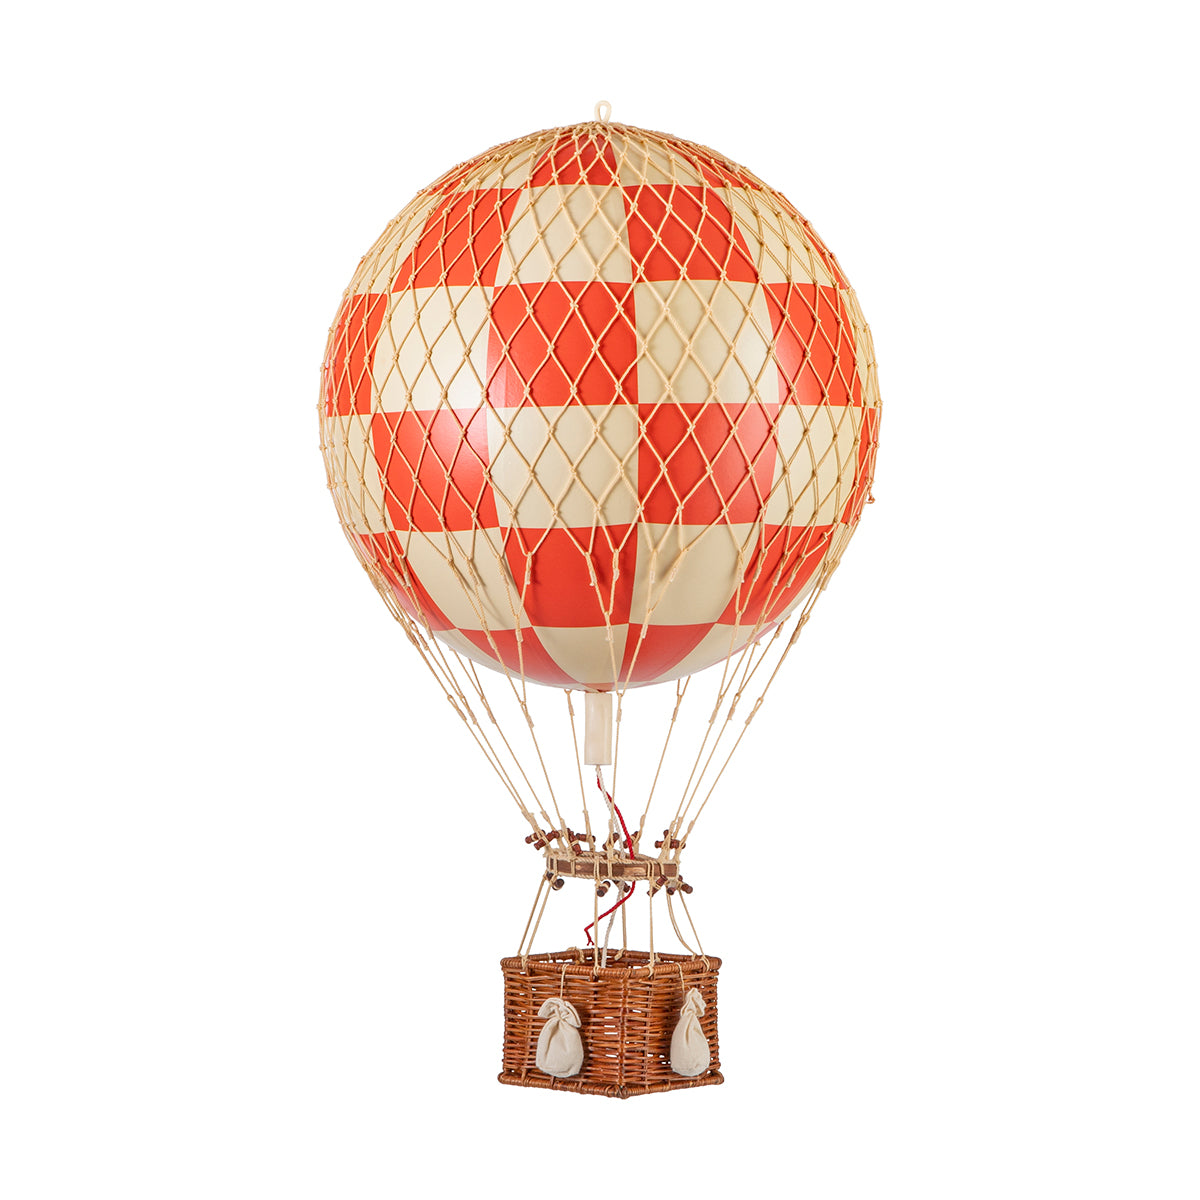 Experience a unique perspective as you soar to new heights in a Wonderen Medium Hot Air Balloon - Royal Aero with a basket attached, brought to you by Wonderen Stroopwafels.